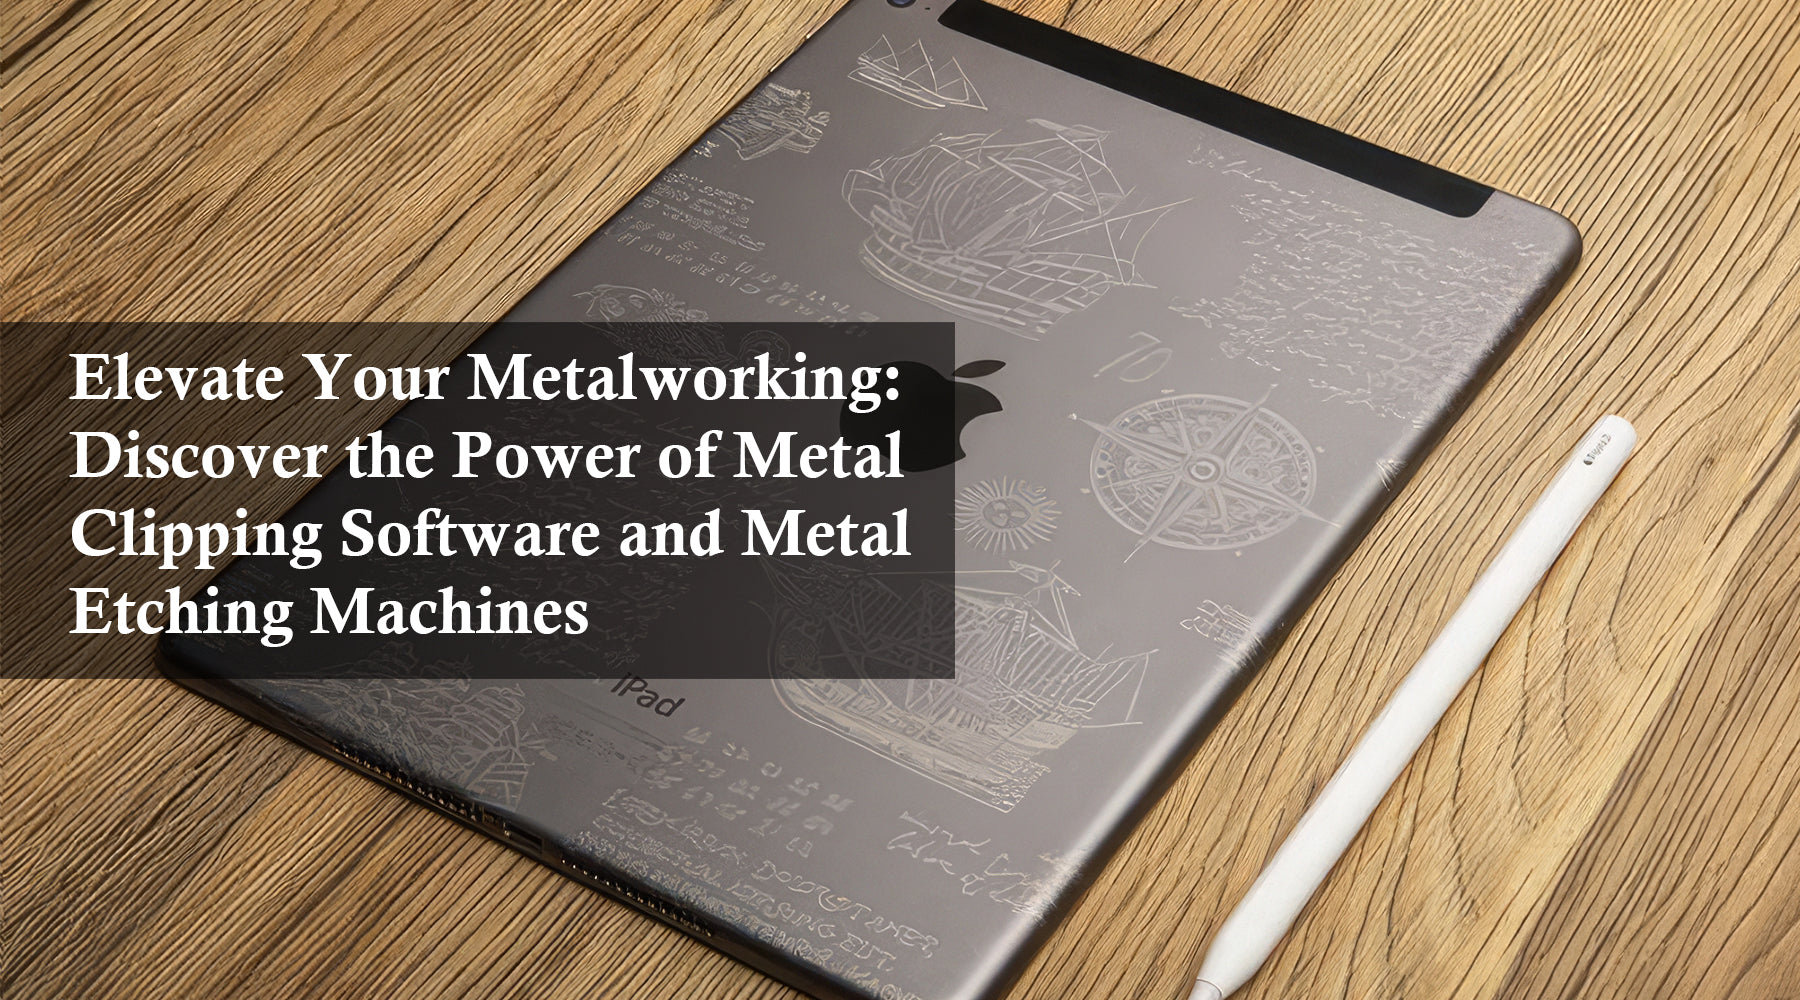 Elevate Your Metalworking: Discover the Power of Metal Clipping Software and Metal Etching Machines